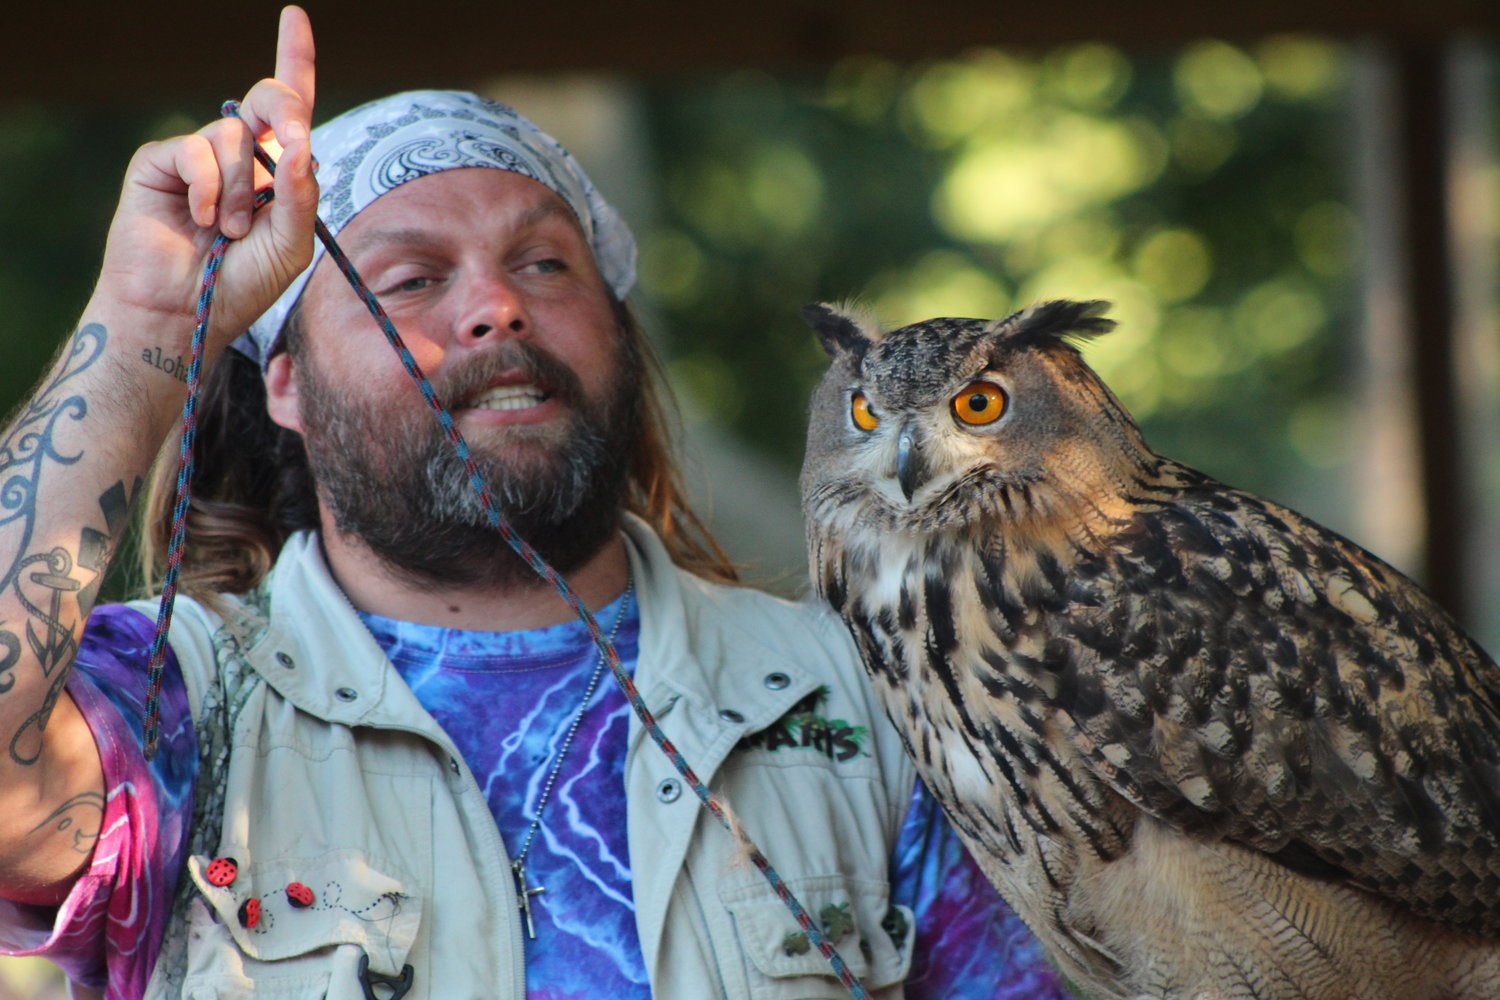 An owl perches on Ryan the Lion's arm during a Silly Safari show.